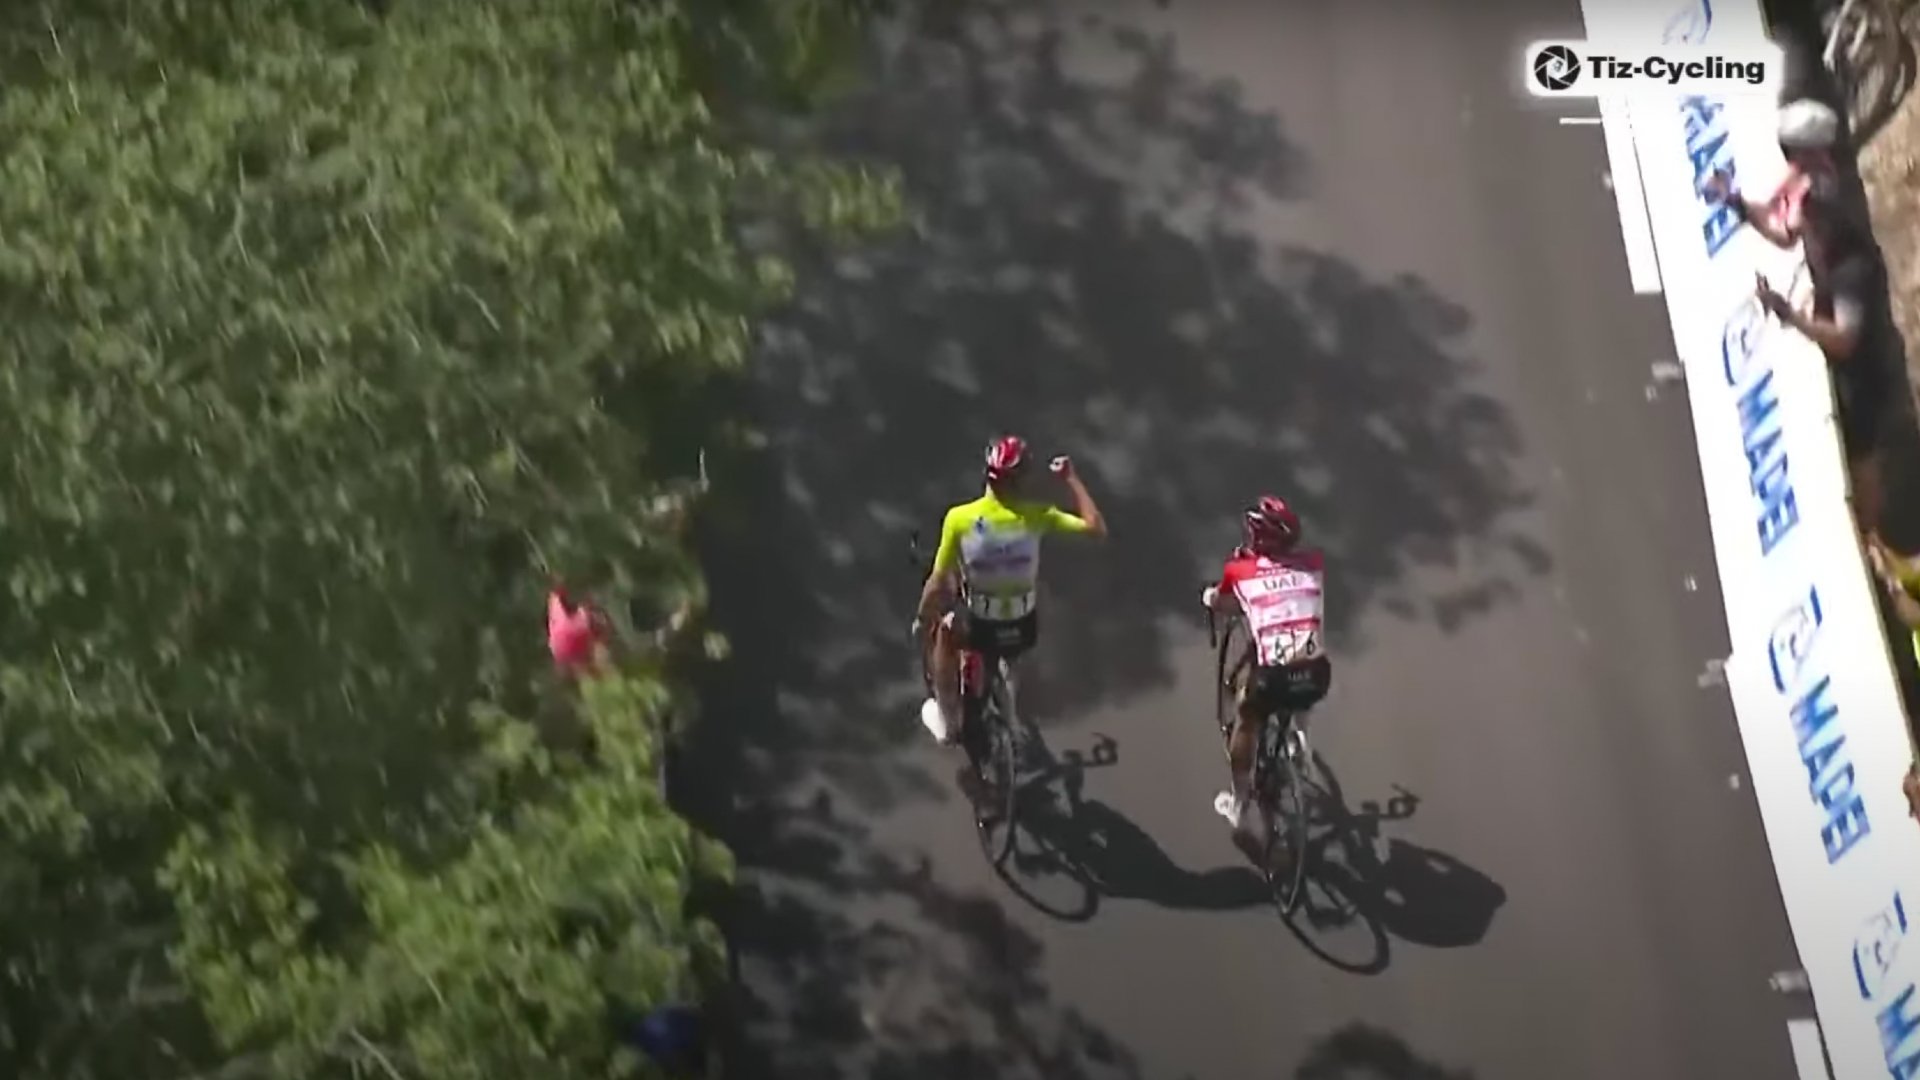 Two Professional Cyclists Just Played Rock, Paper, Scissors To Decide The Race Winner